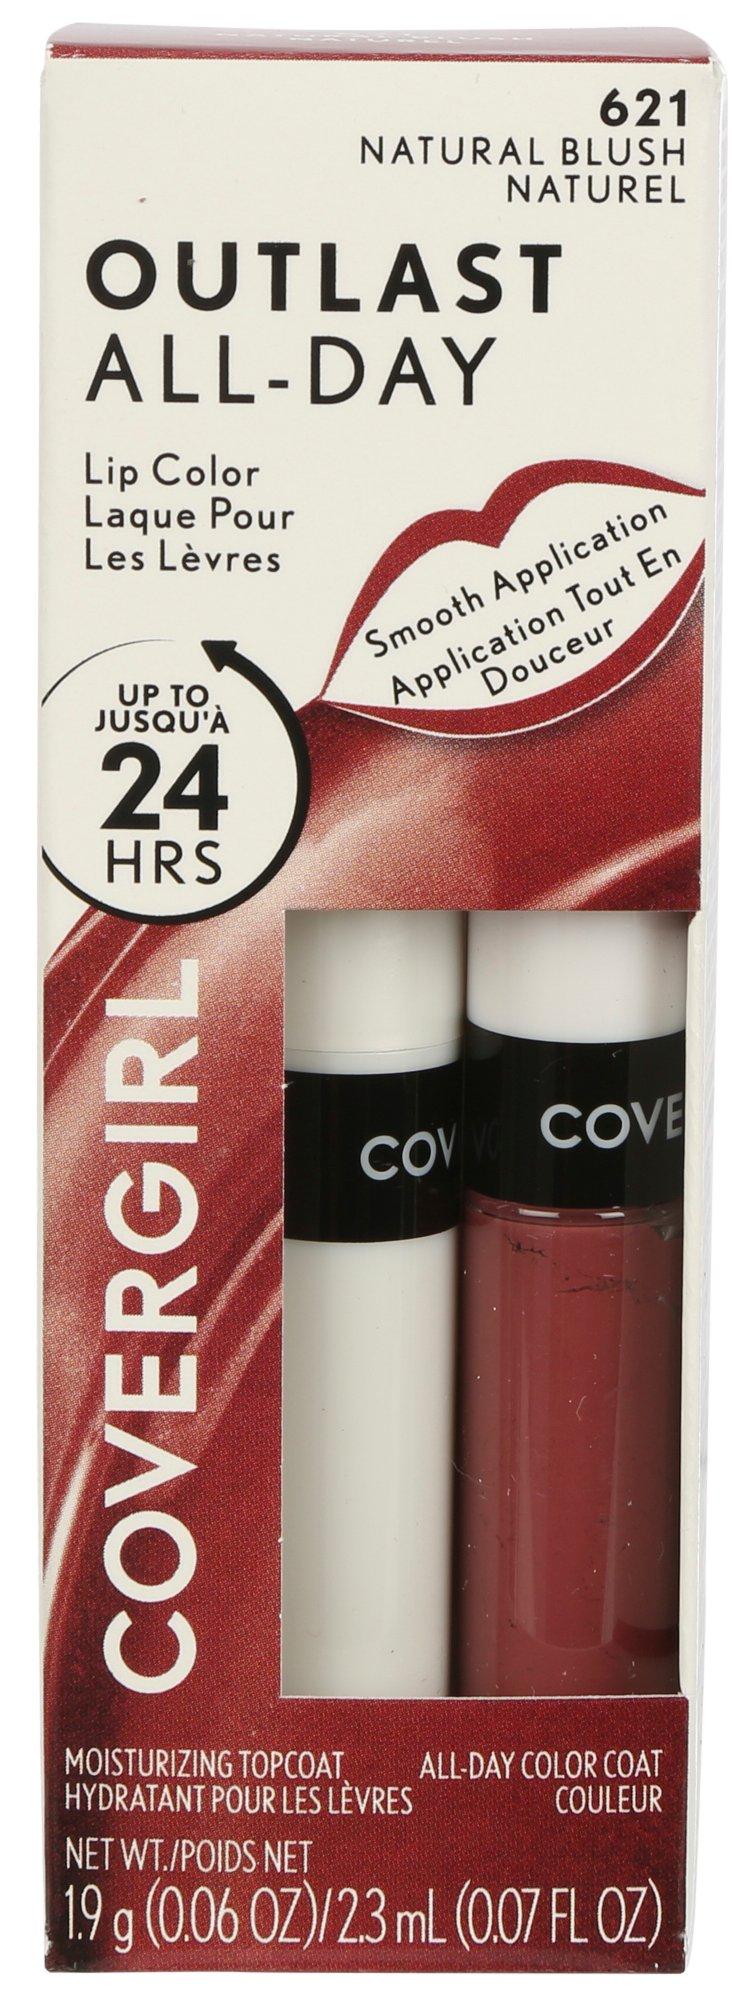 Cover Girl 2-Pc. Outlast All-Day Color Coat & Top Coat Set